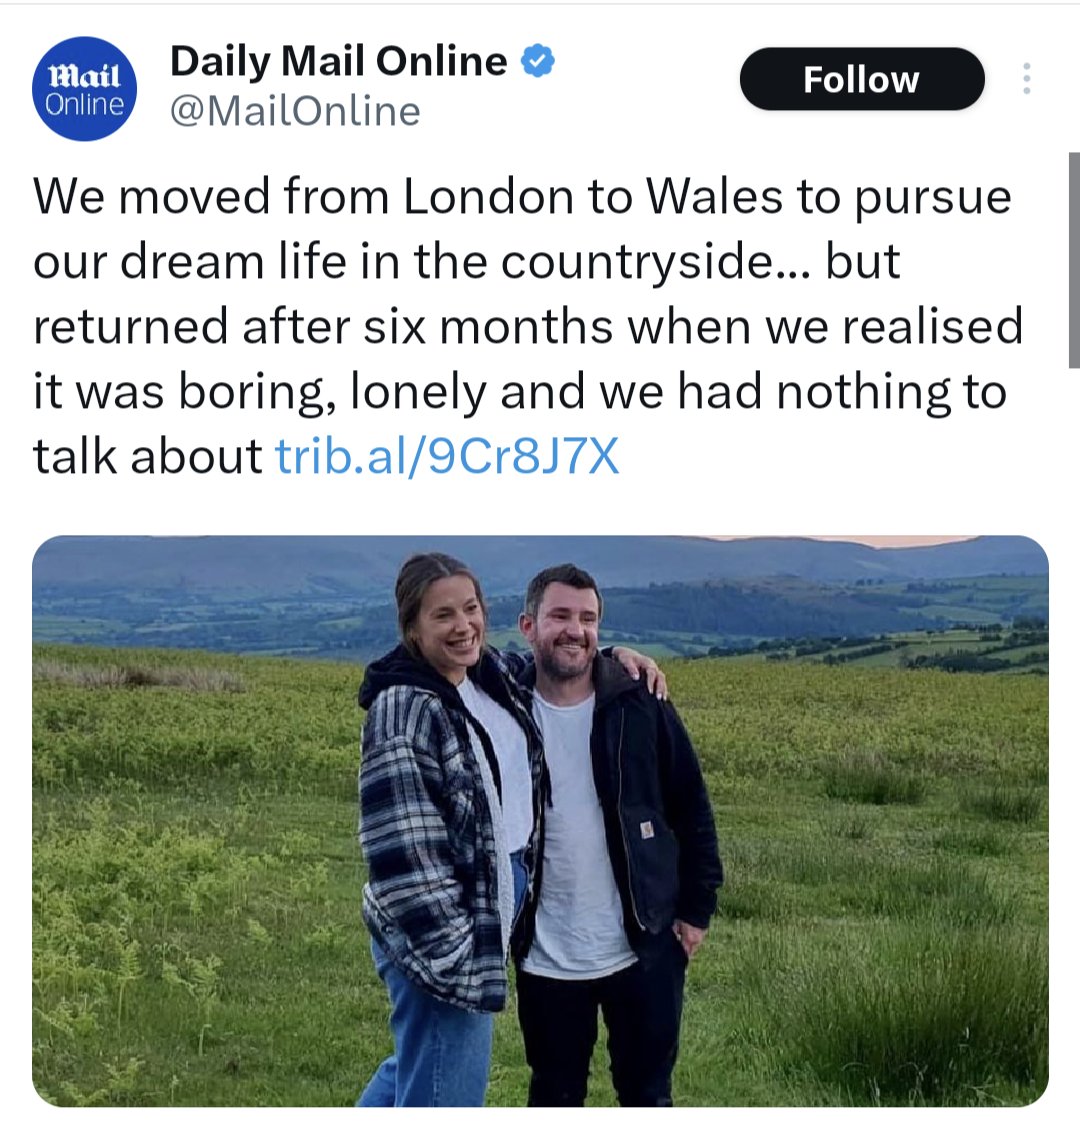 Absolutely devastated to hear that this couple has left. Gutted. Heartbroken. What WILL we do here in boring Wales without them?